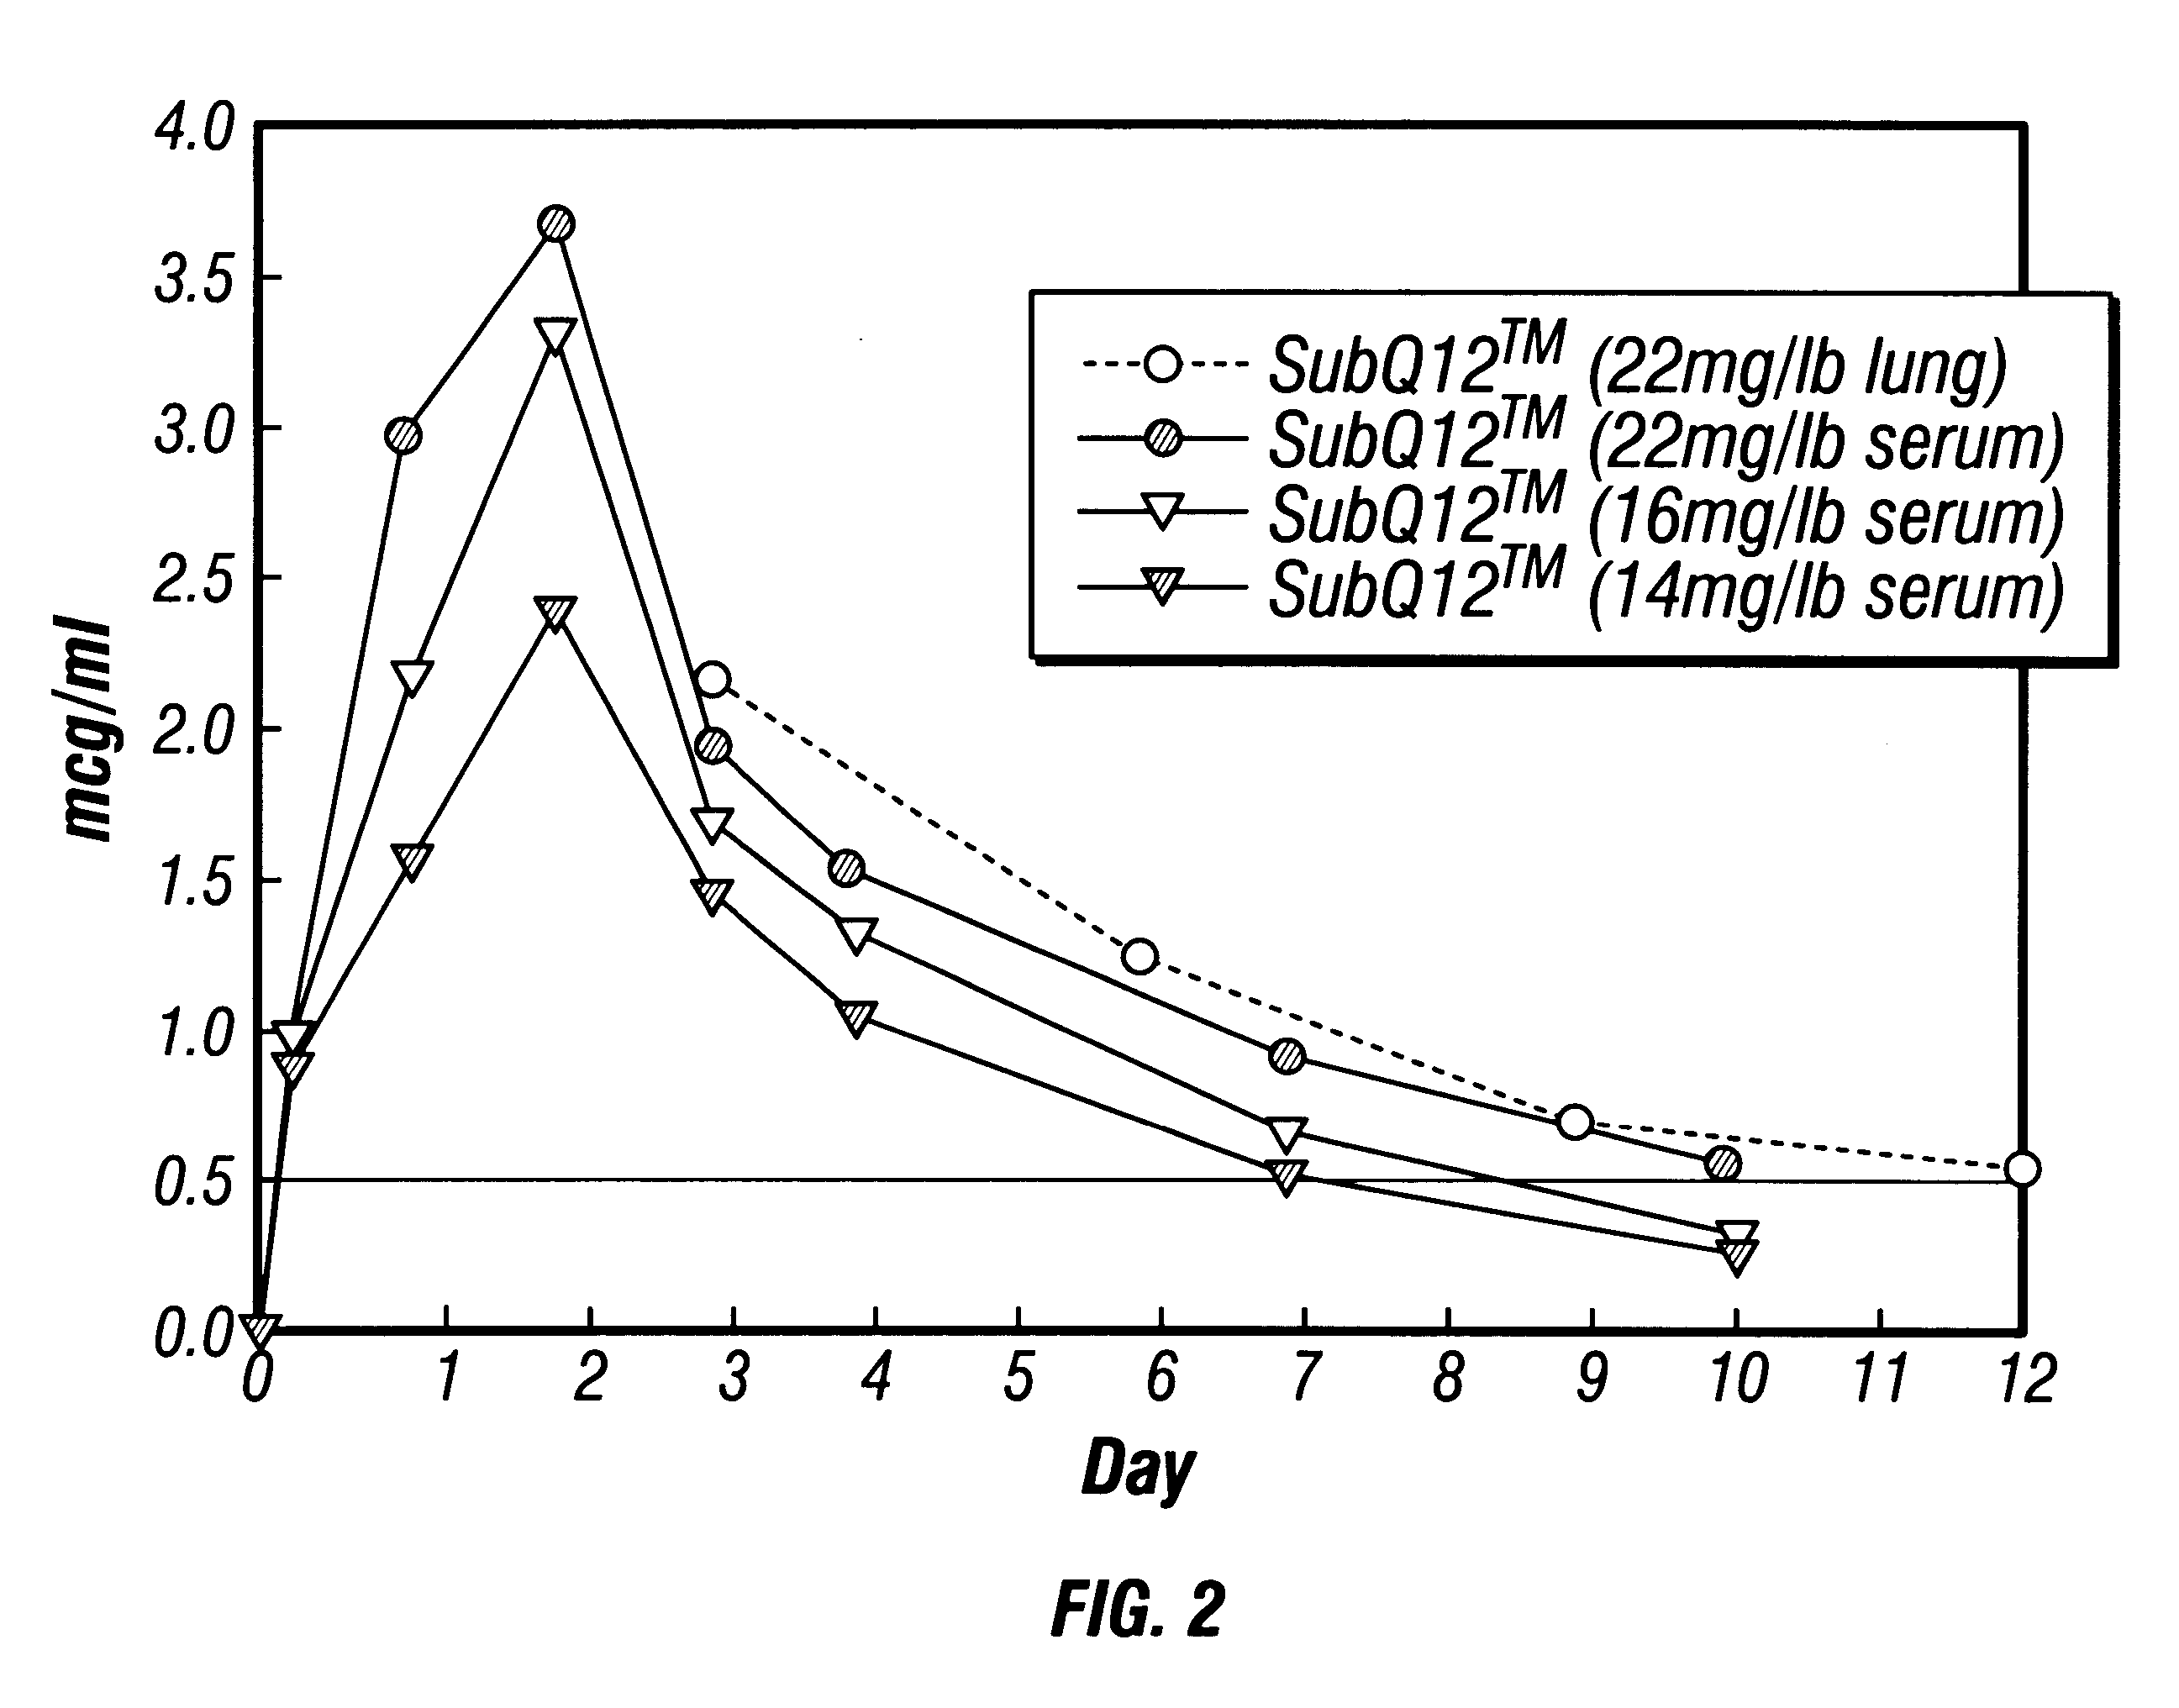 Phospholipid-coated microcrystals for the sustained release of pharmacologically active compounds and methods of their manufacture and use